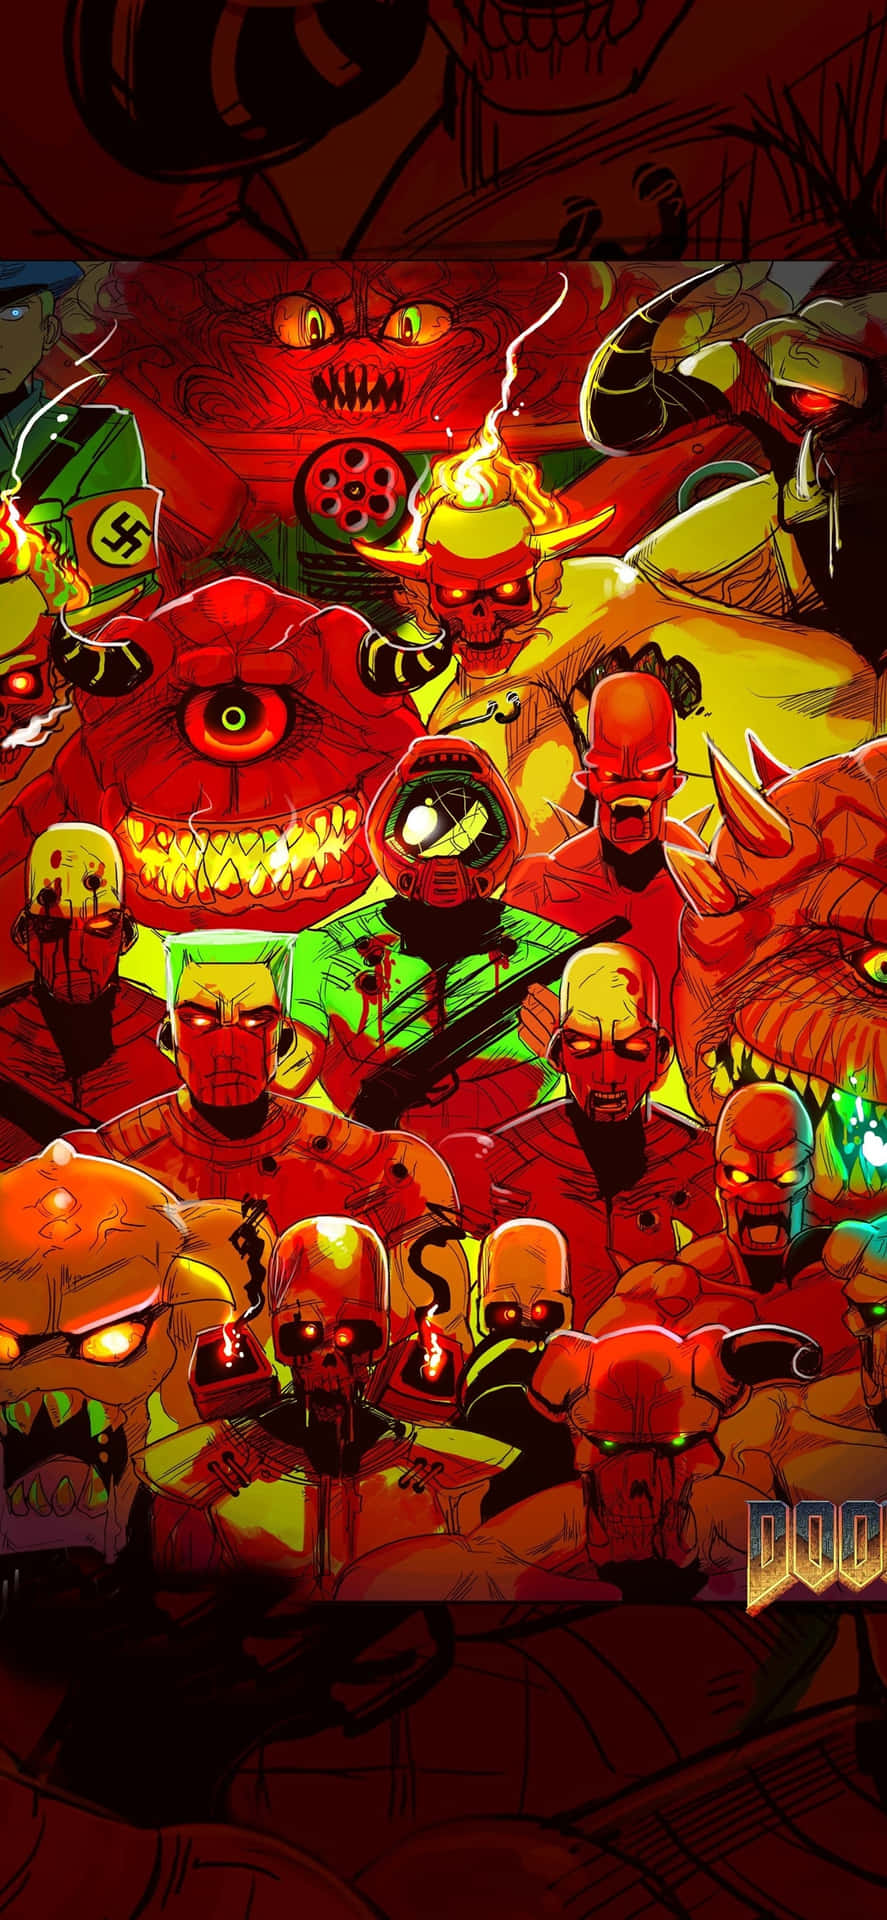 'explore The Depths Of Doom Over Your Iphone And Ipad' Background